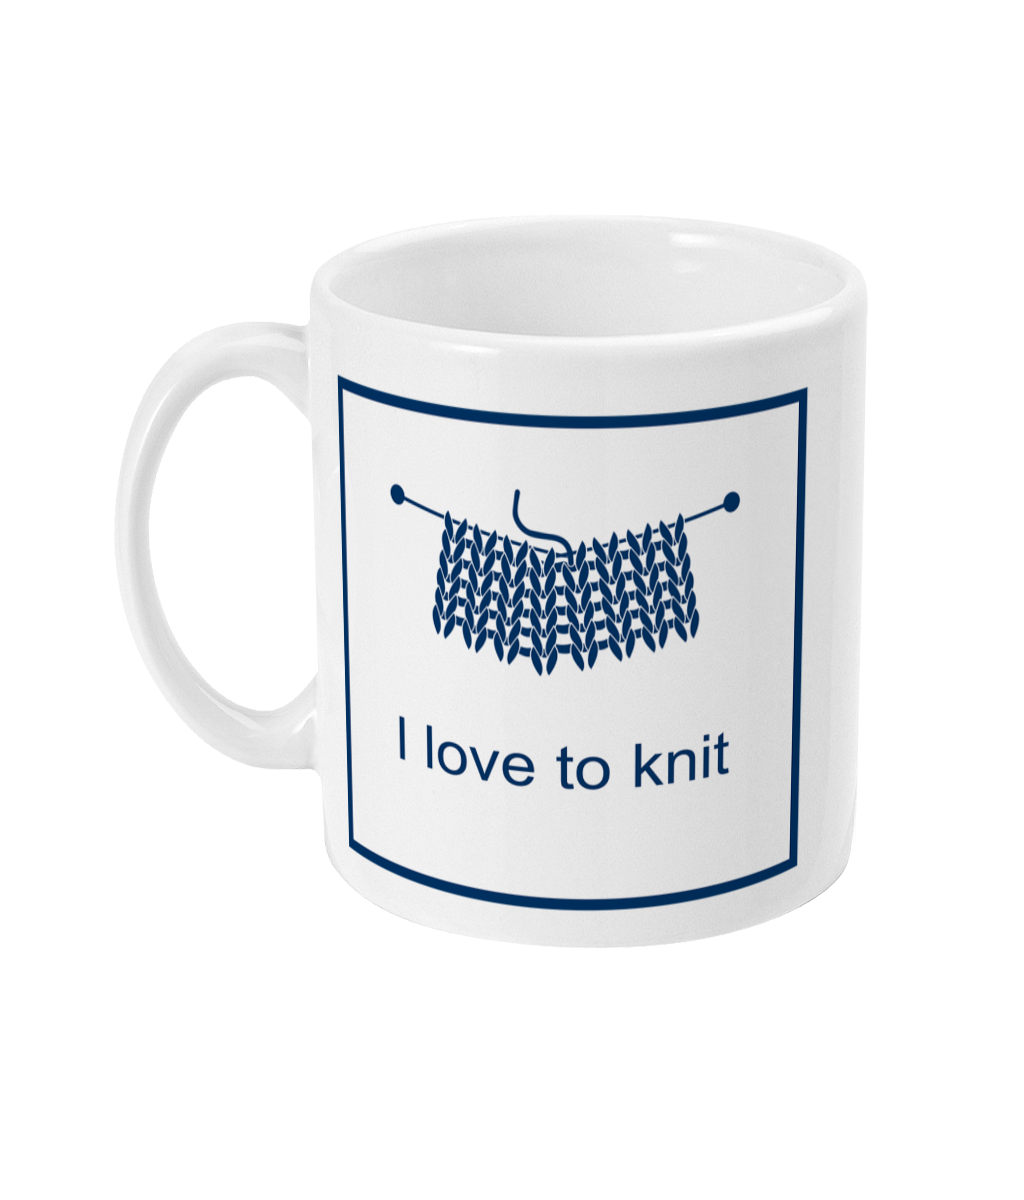 mug with I love to knit printed on it